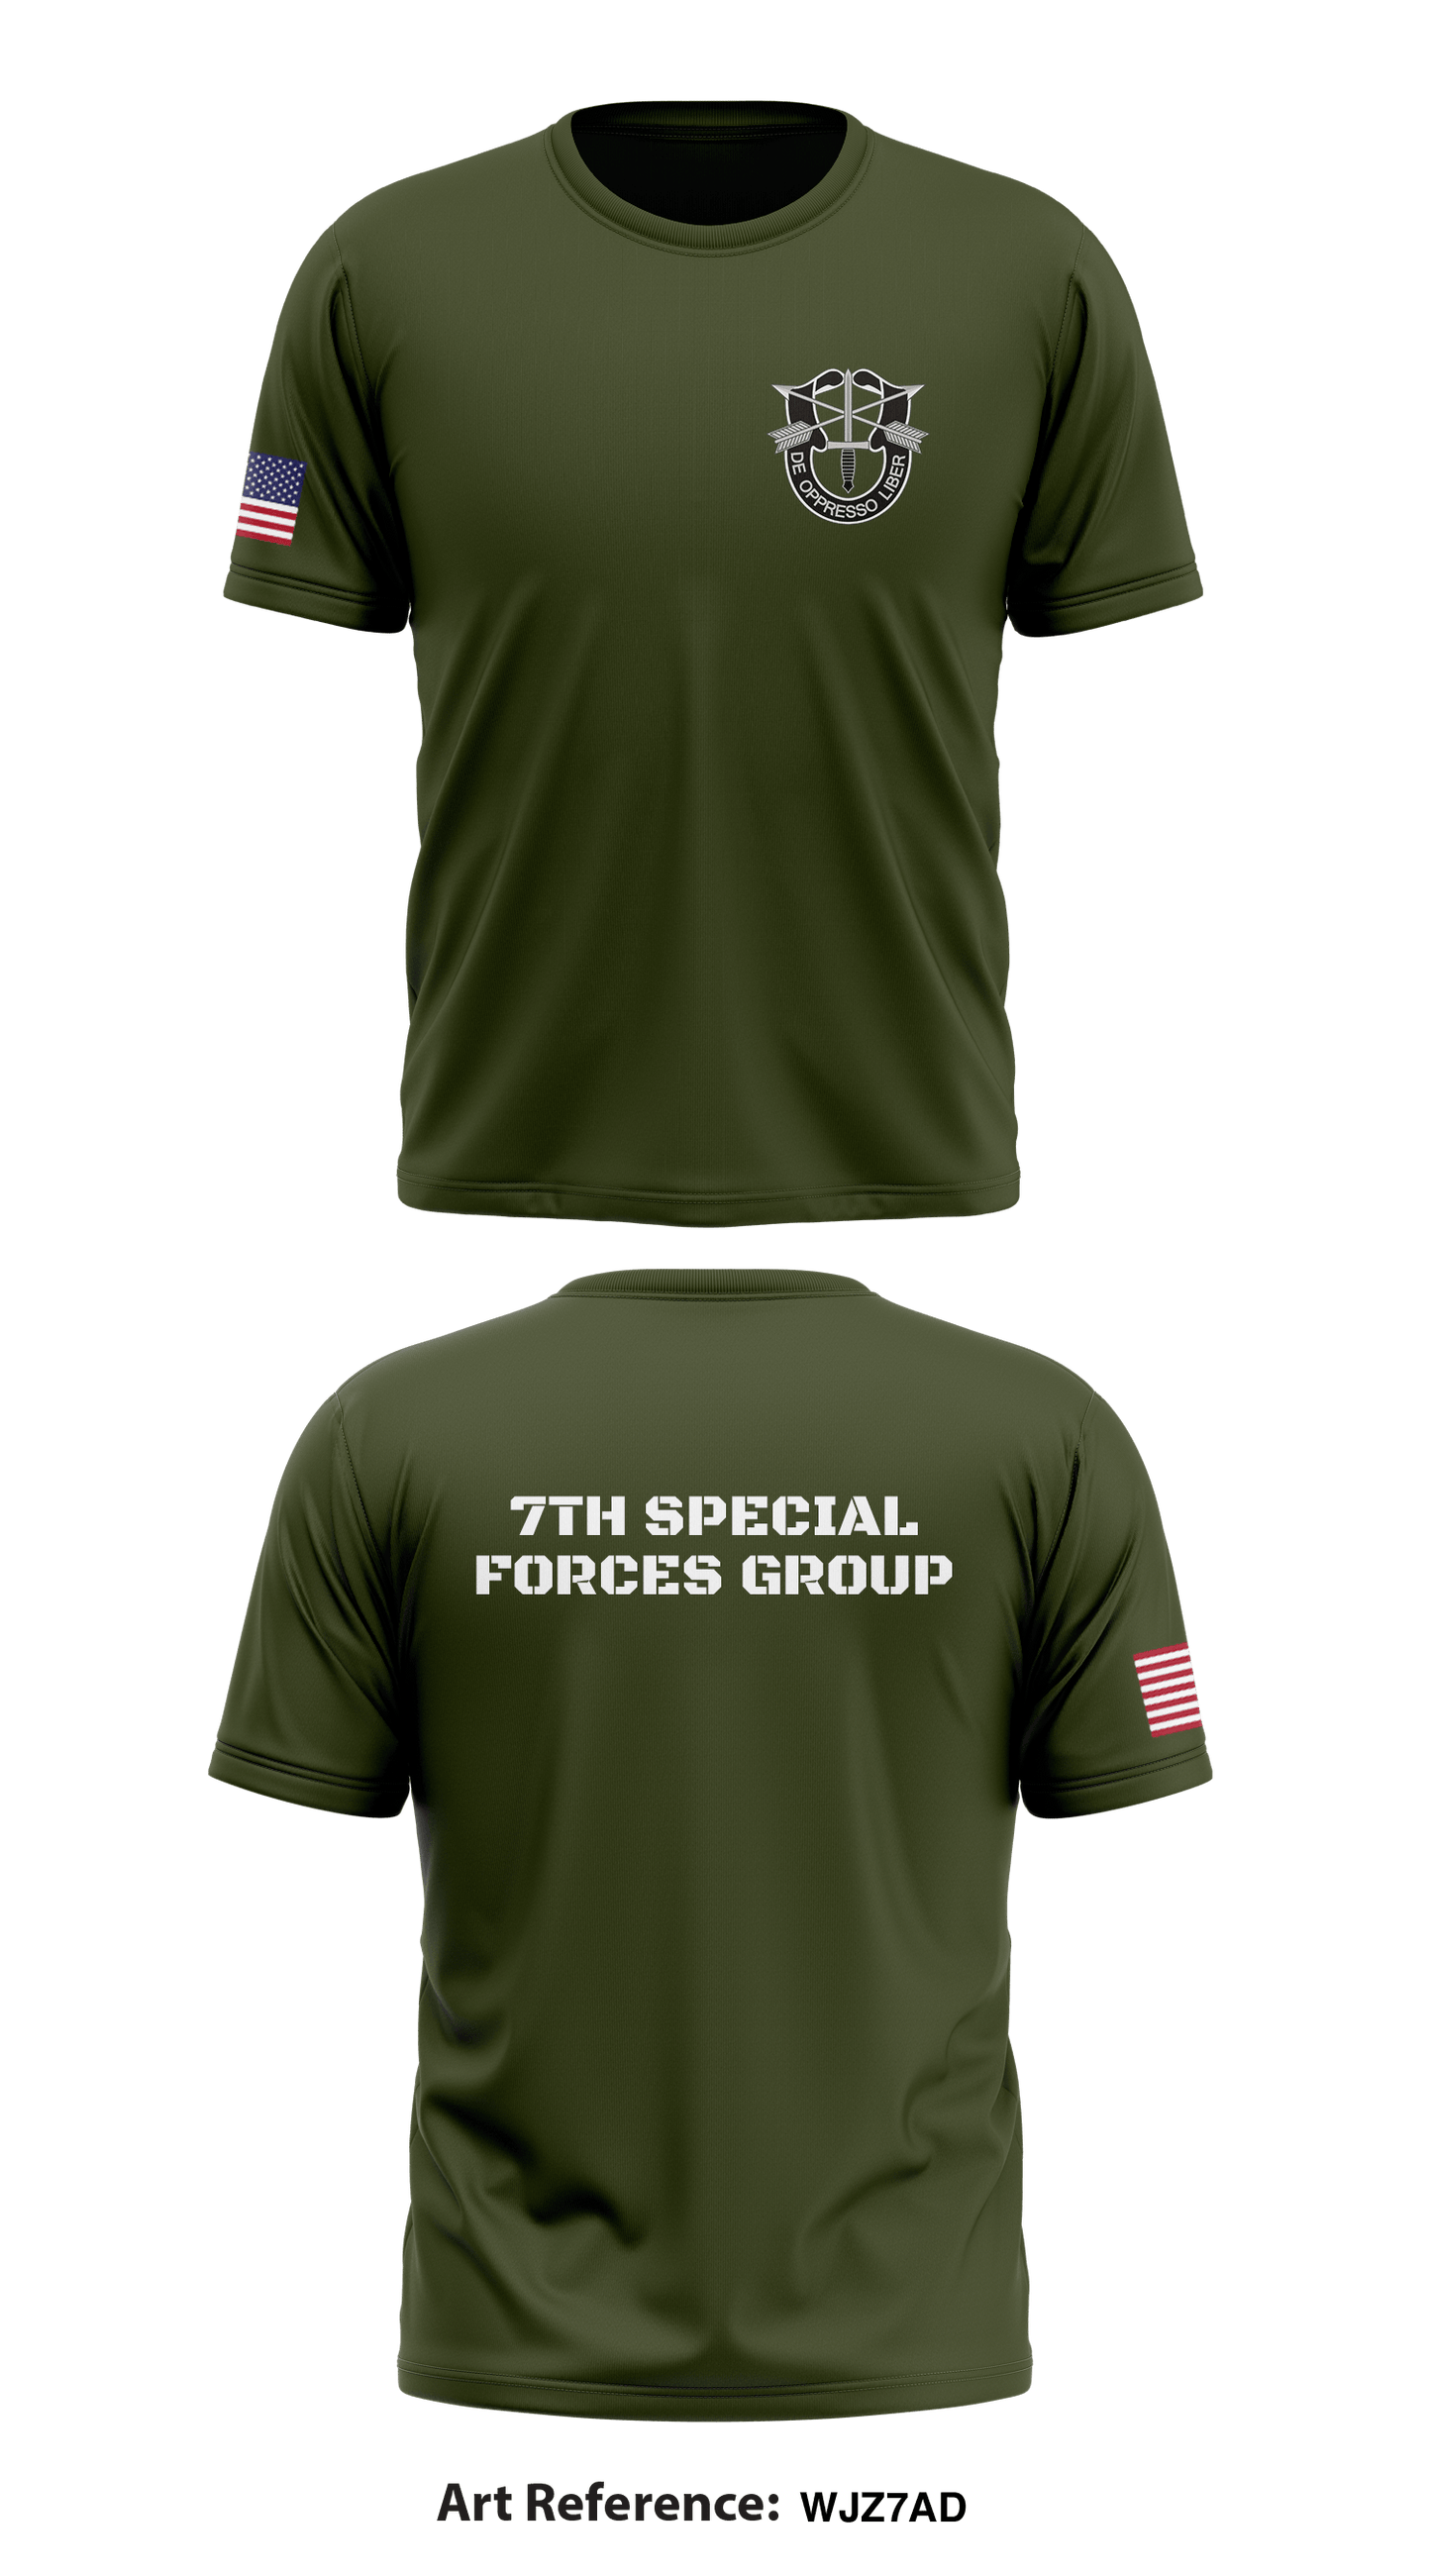 7th Special Forces Group Store 1 Core Men's SS Performance Tee - Wjz7ad